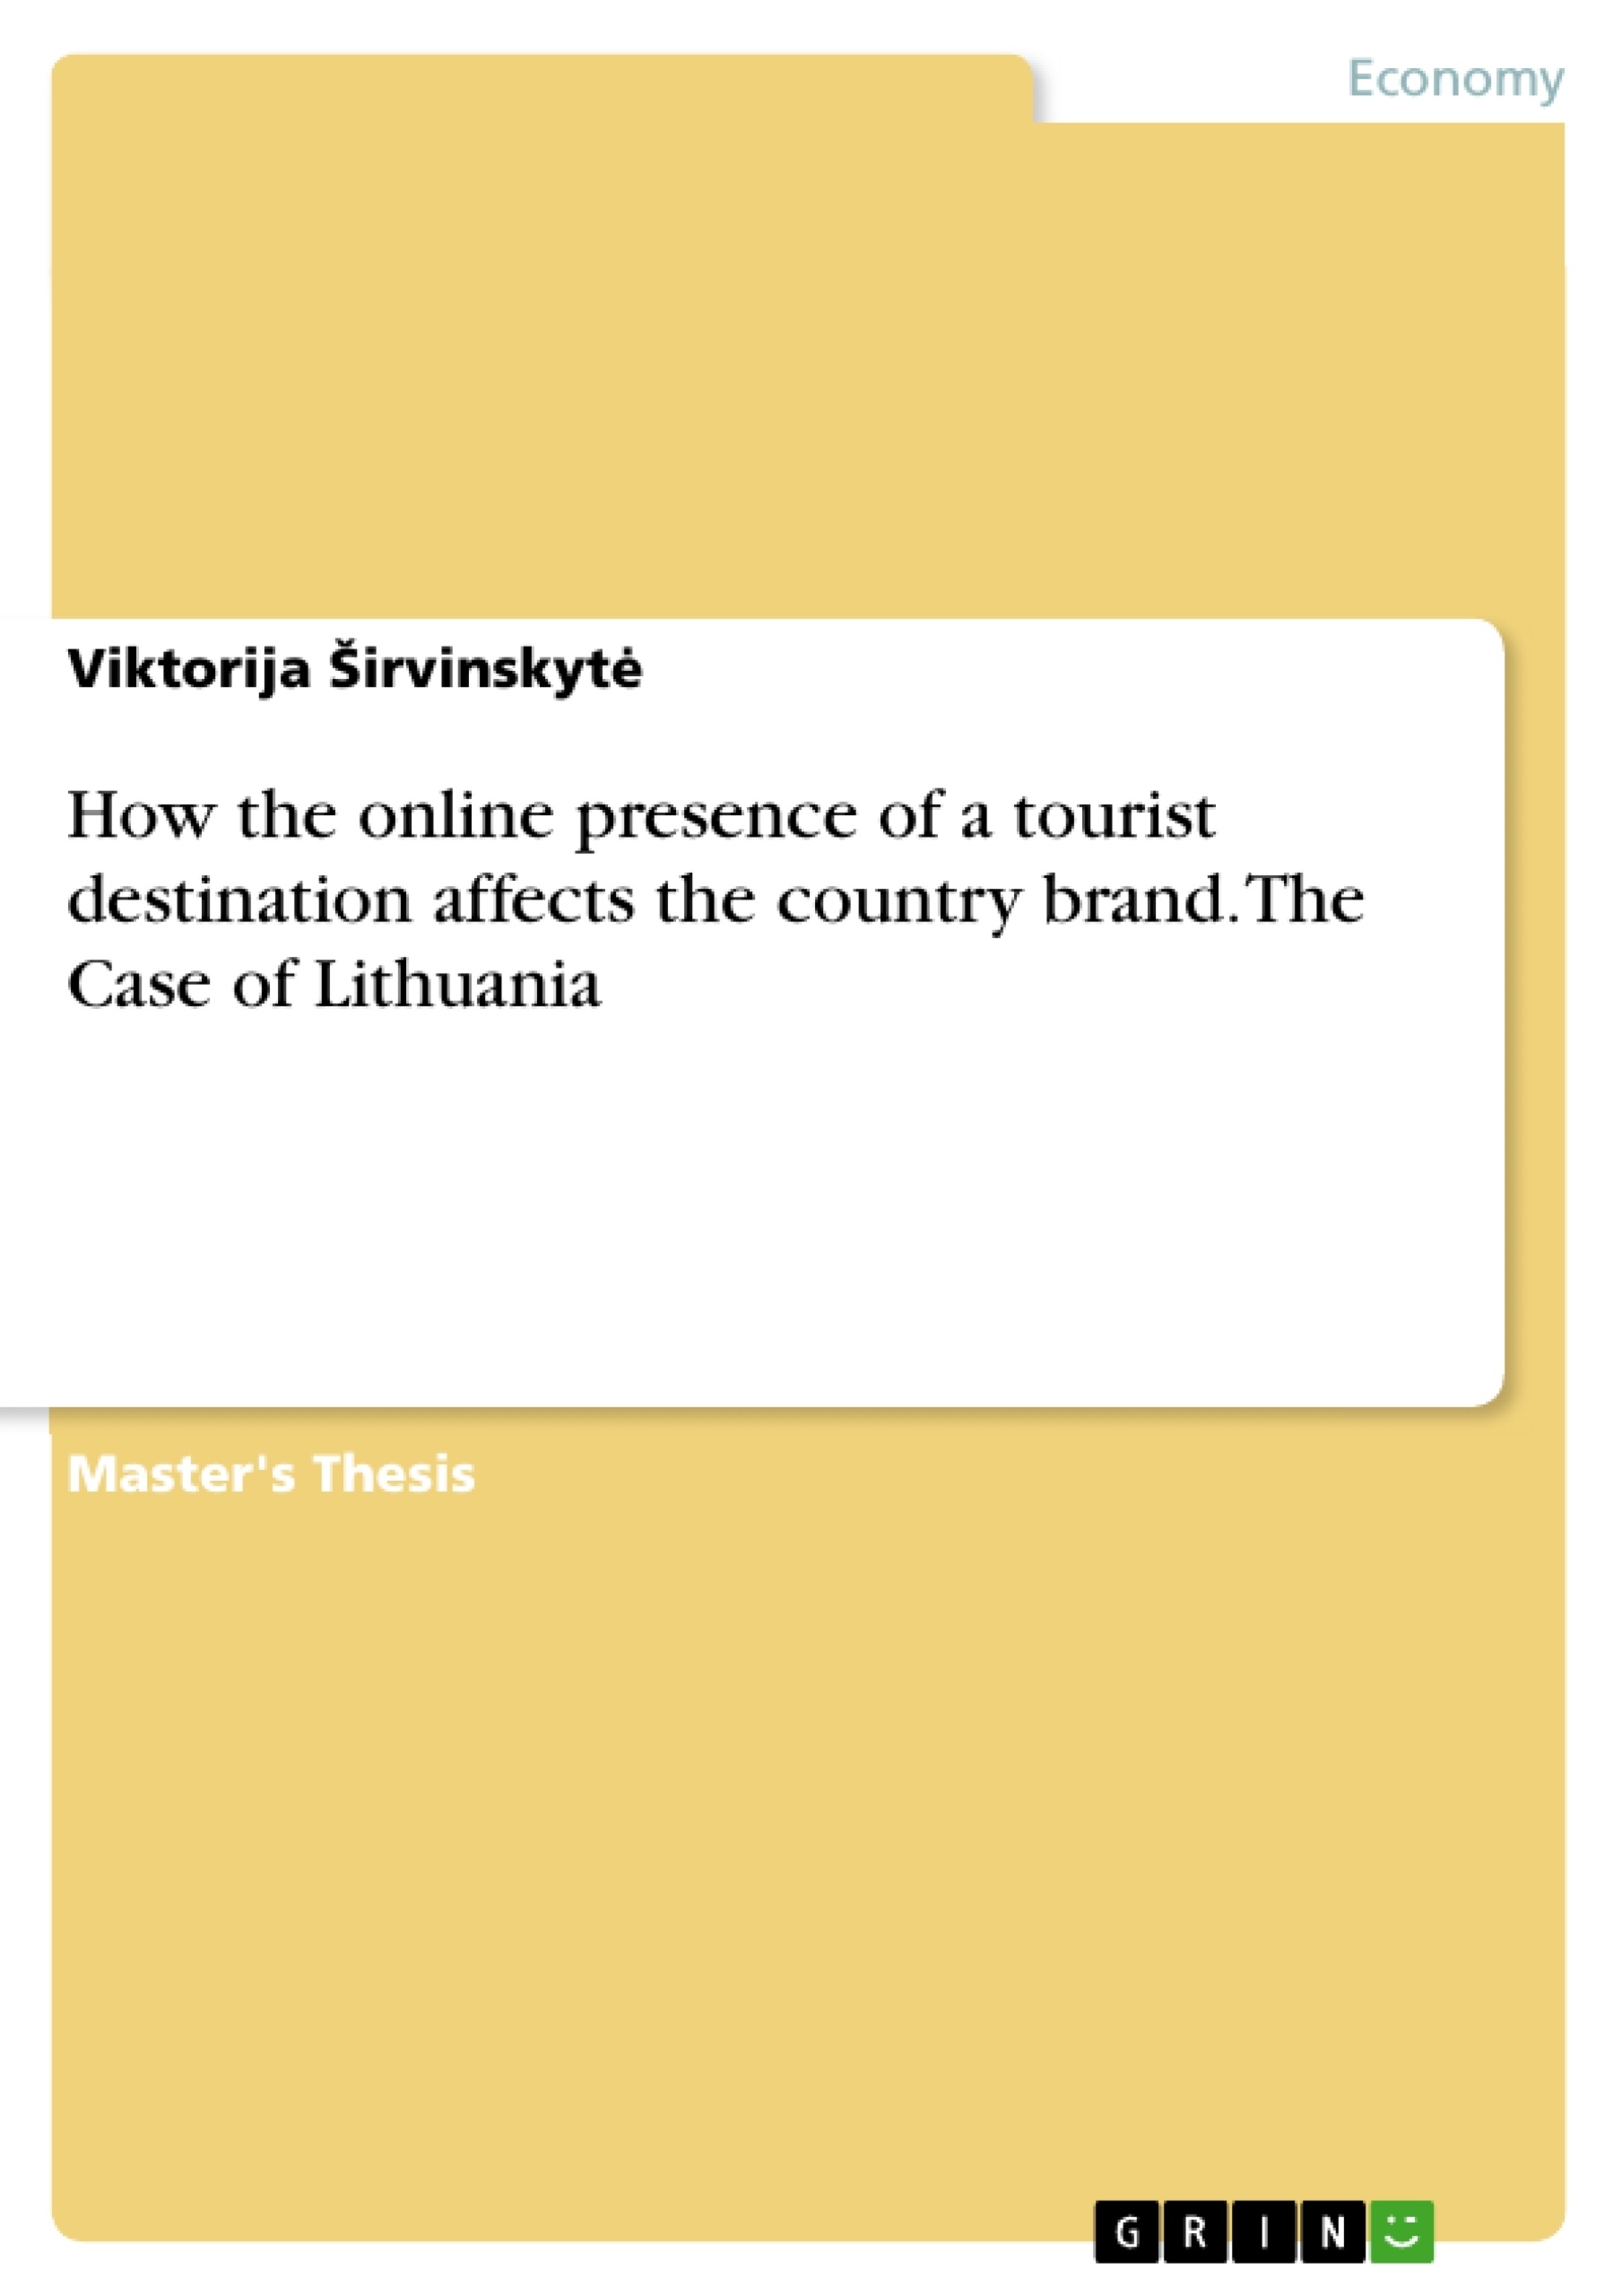 Título: How the online presence of a tourist destination affects the country brand. The Case of Lithuania